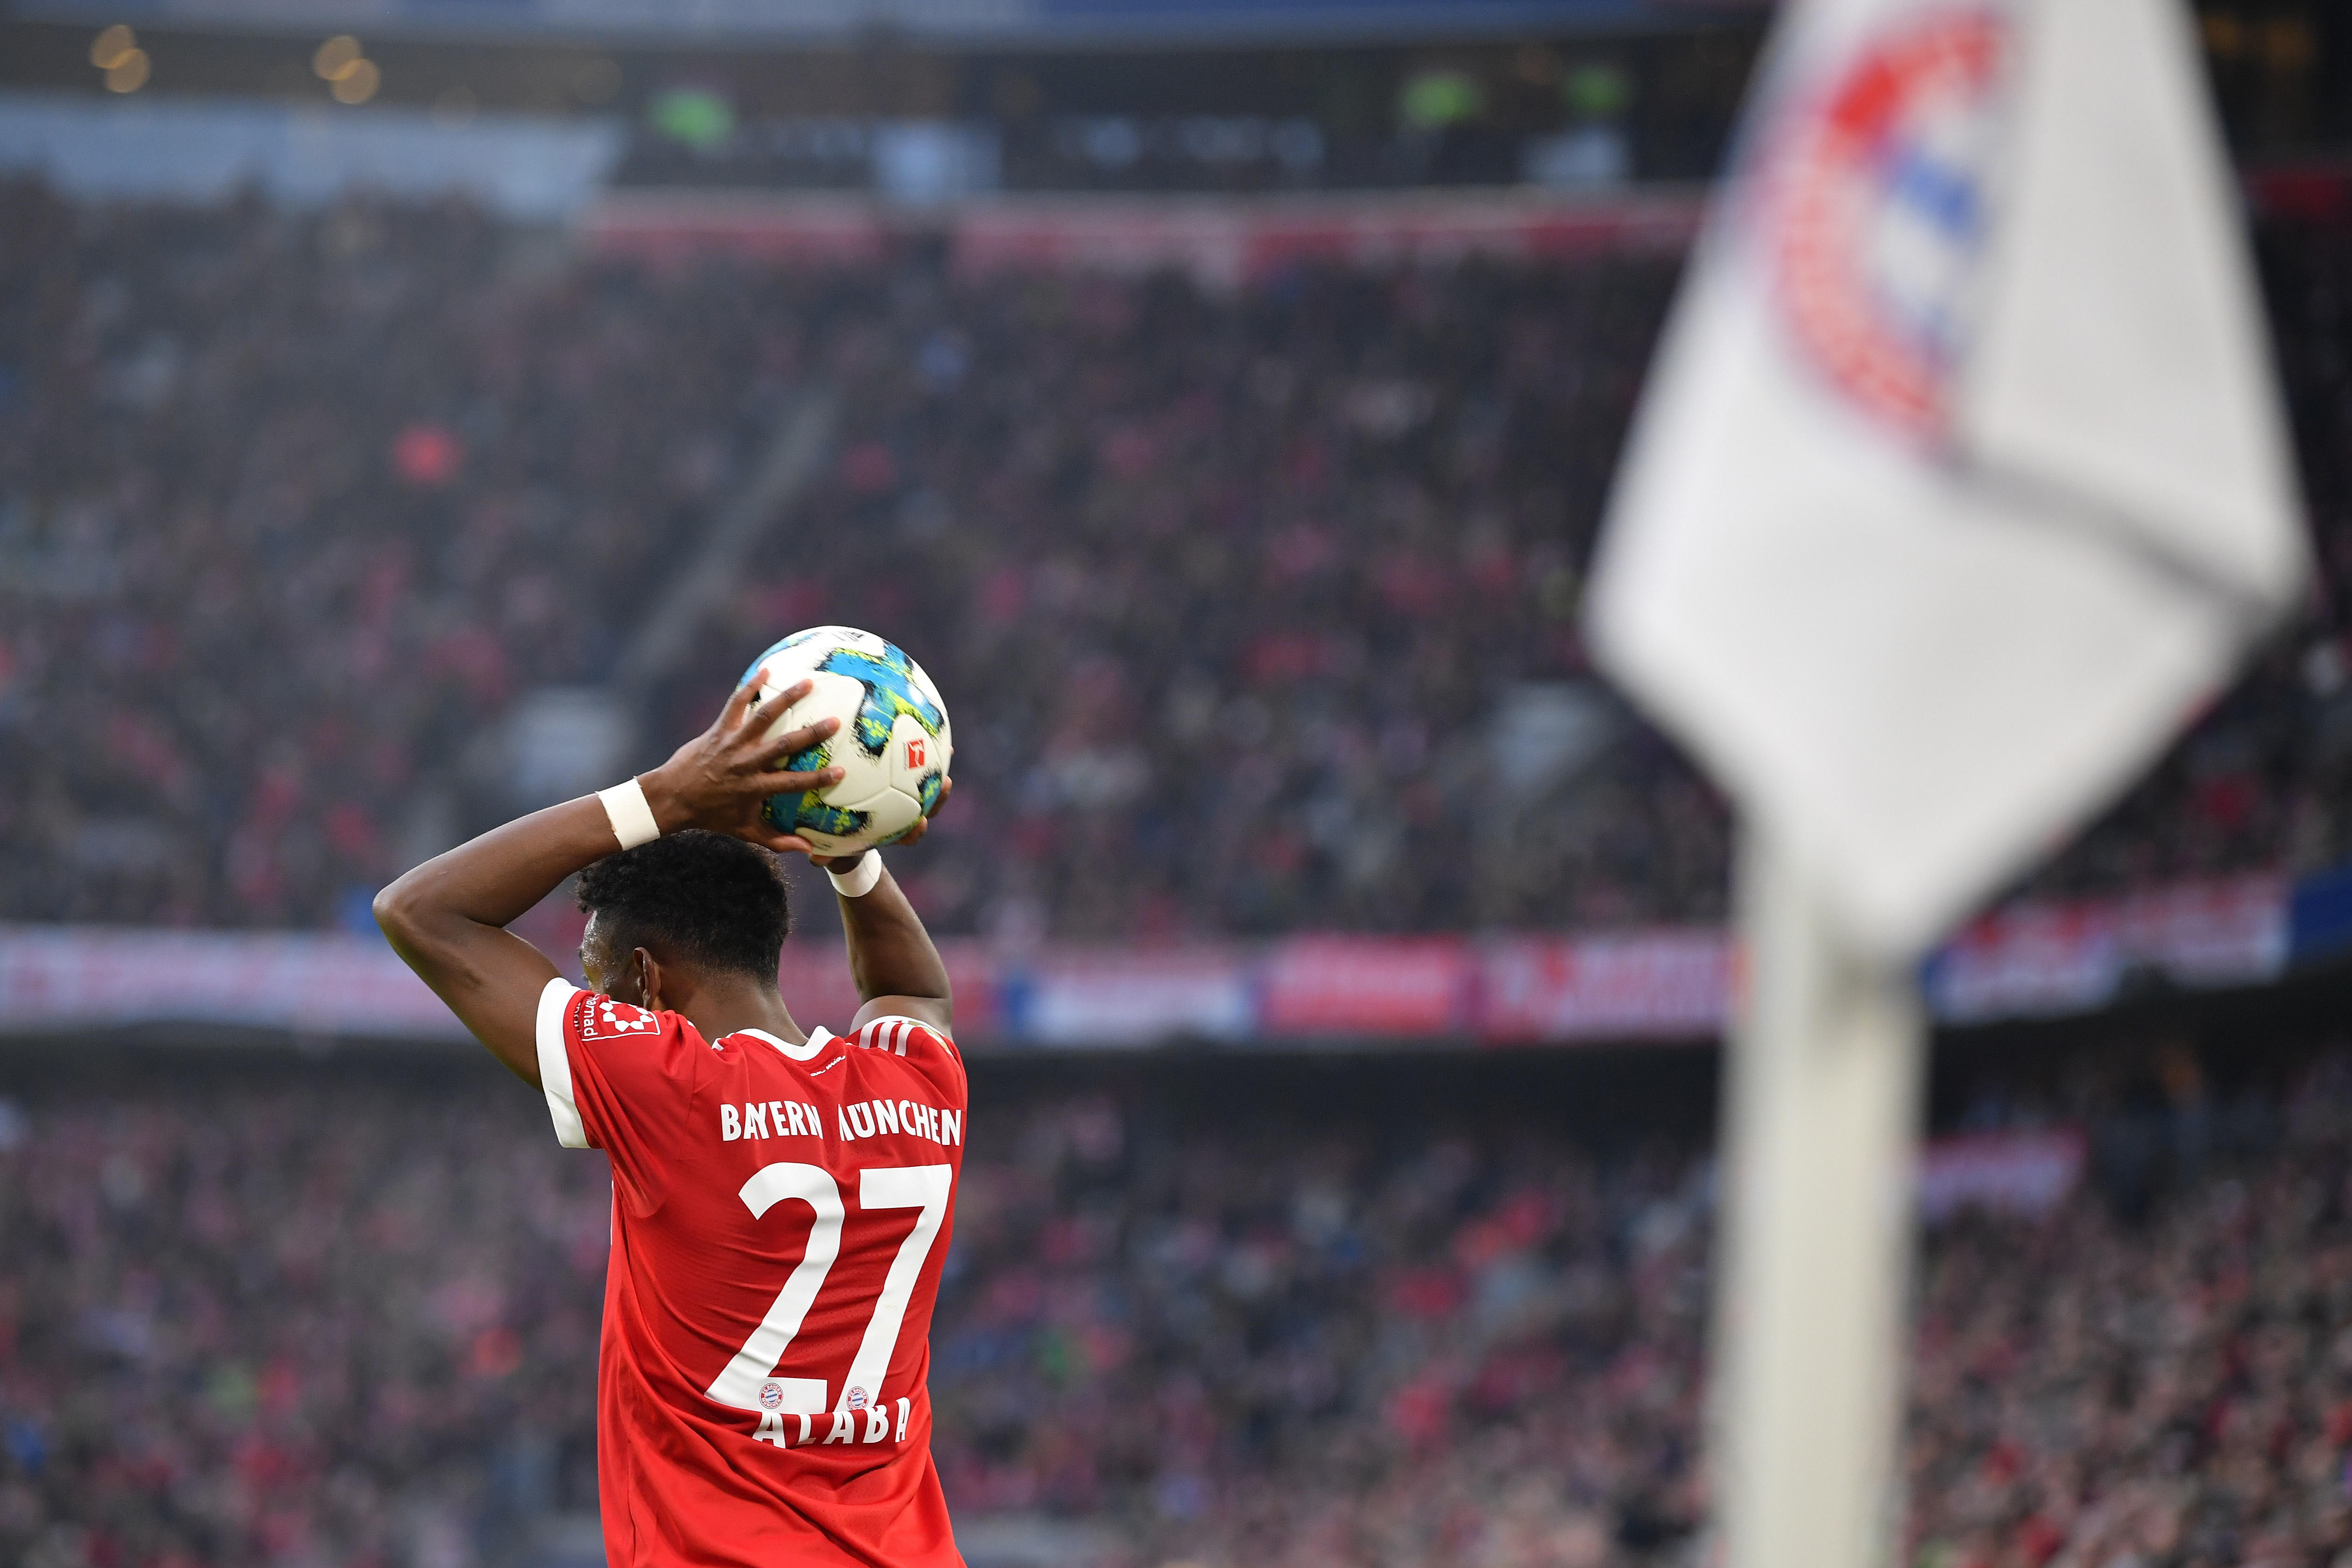 MUNICH, GERMANY - JANUARY 27: David Alaba of Muenchen prepares to throw the ball during the Bundesliga match between FC Bayern Muenchen and TSG 1899 Hoffenheim at Allianz Arena on January 27, 2018 in Munich, Germany. (Photo by Sebastian Widmann/Bongarts/Getty Images)